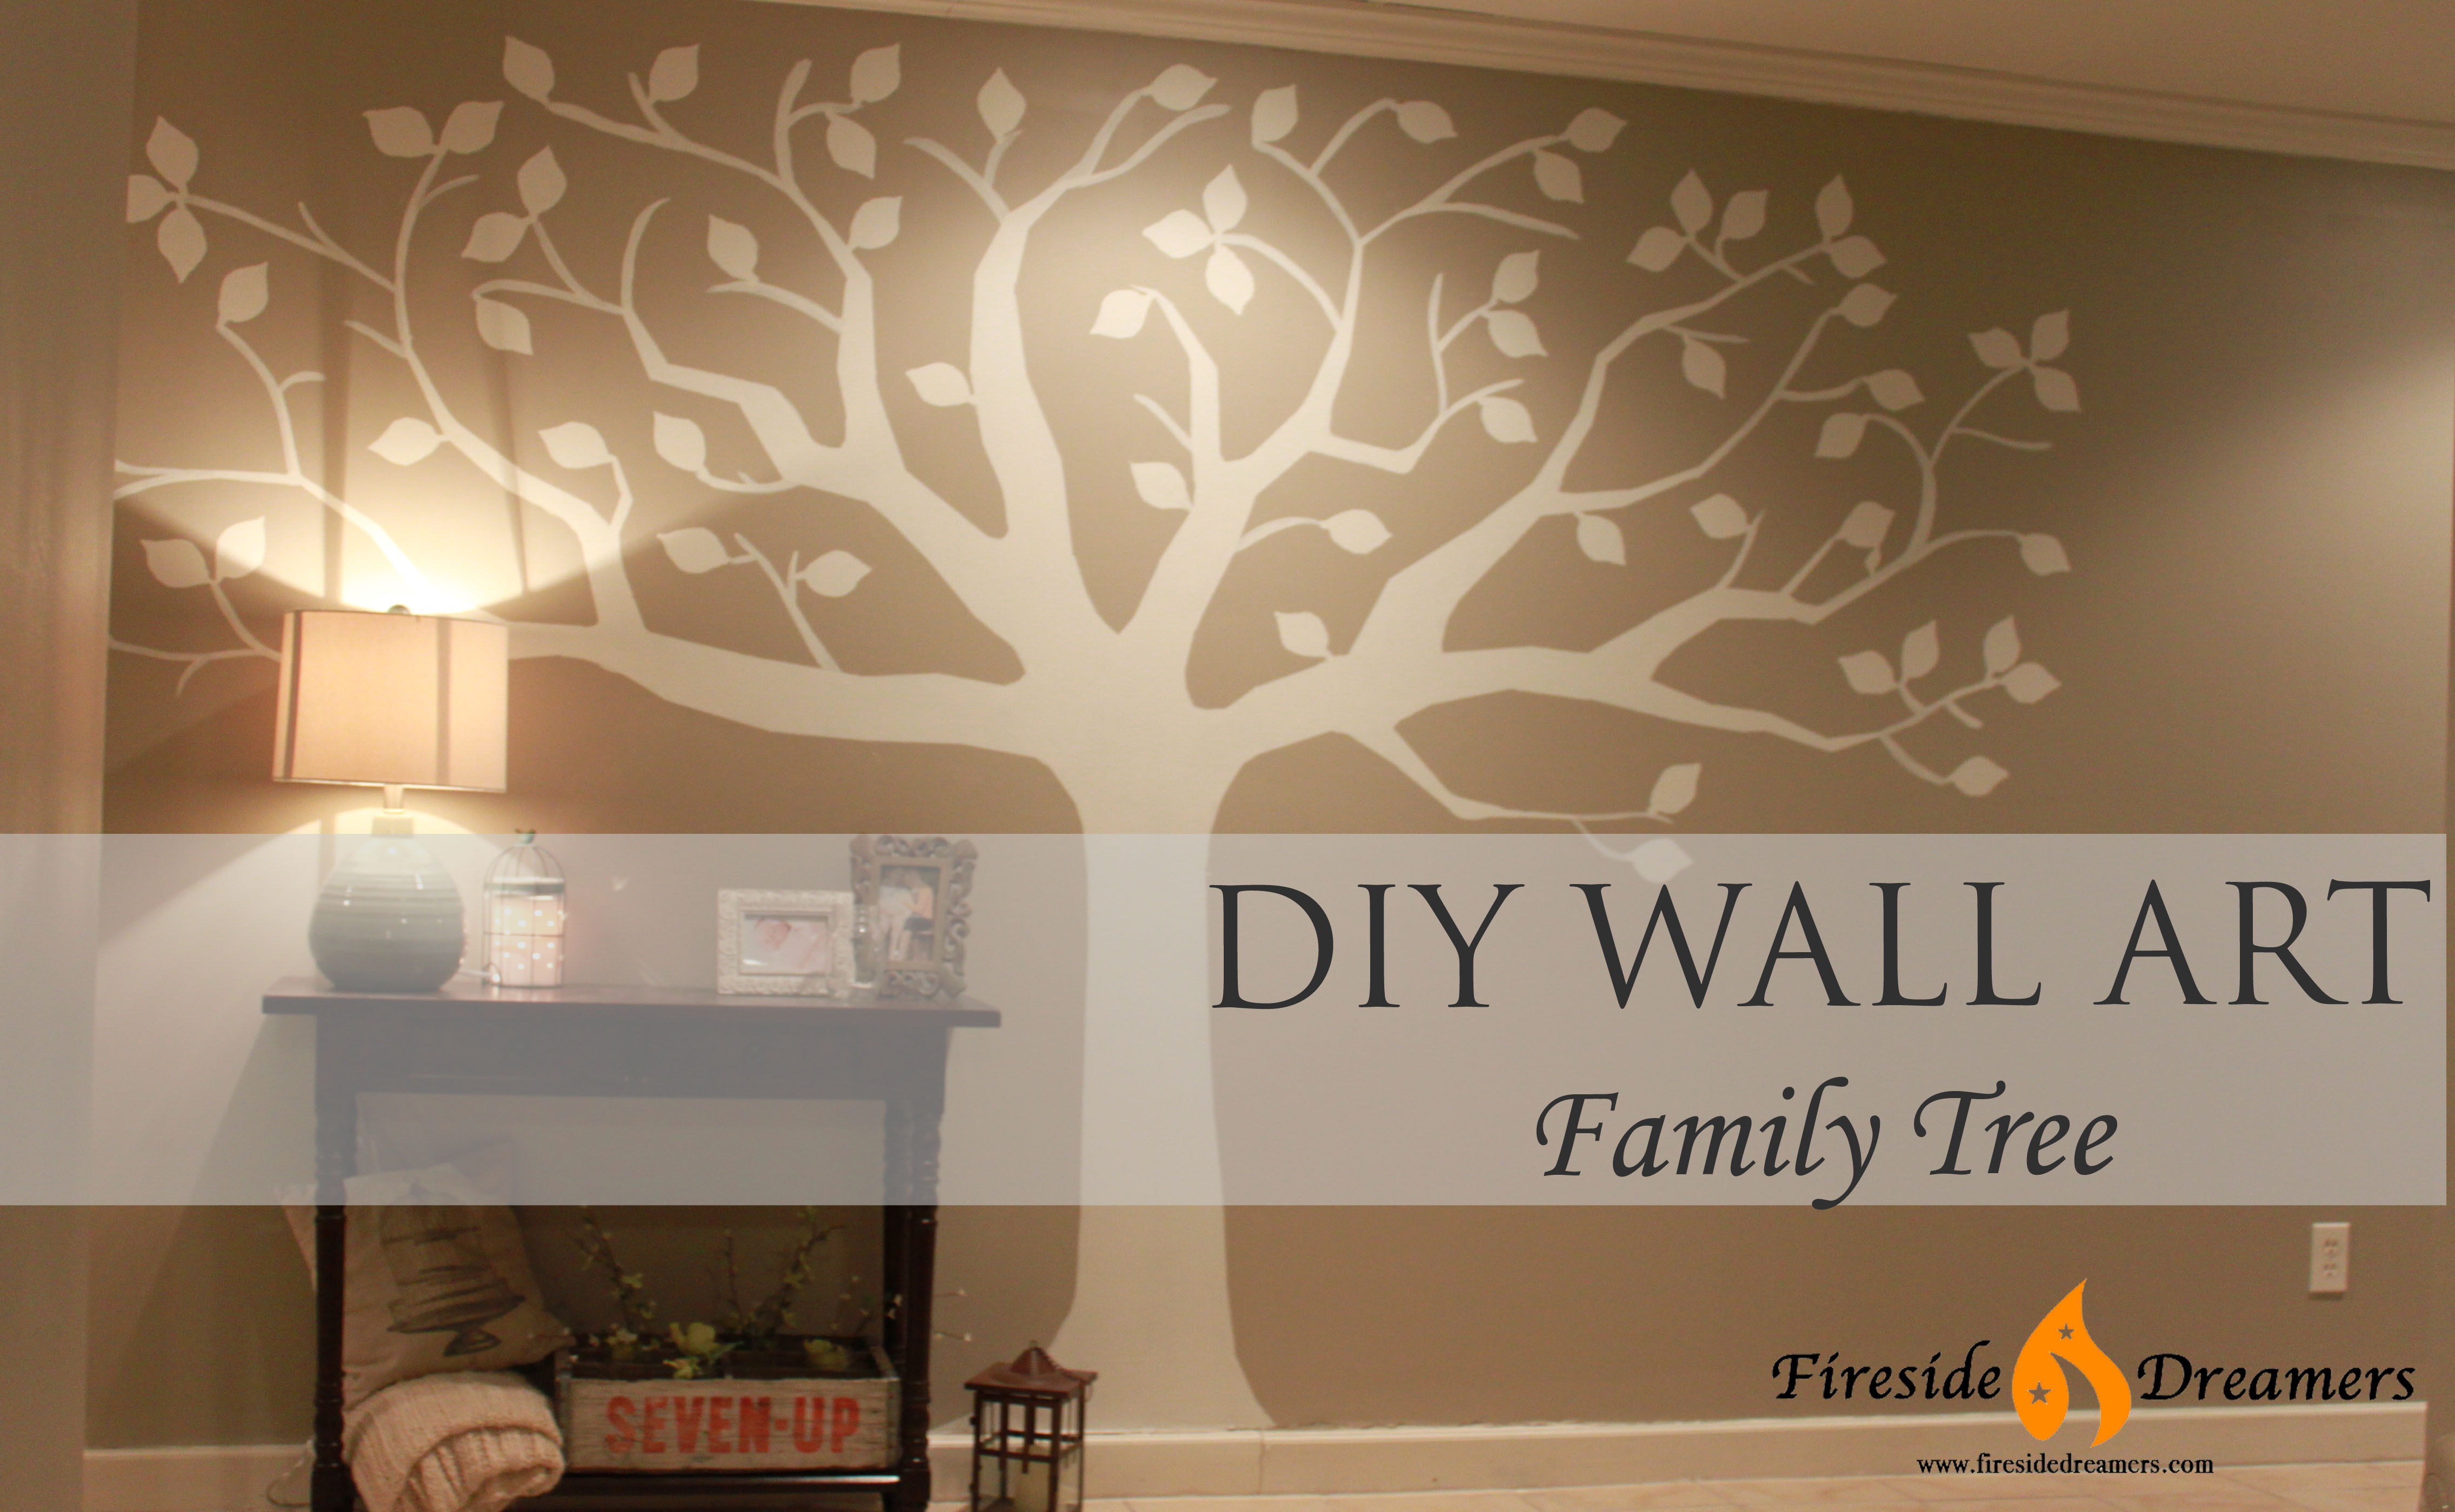 Best ideas about DIY Family Tree
. Save or Pin The Rinehart s DIY Family Tree Art Fireside Dreamers Now.